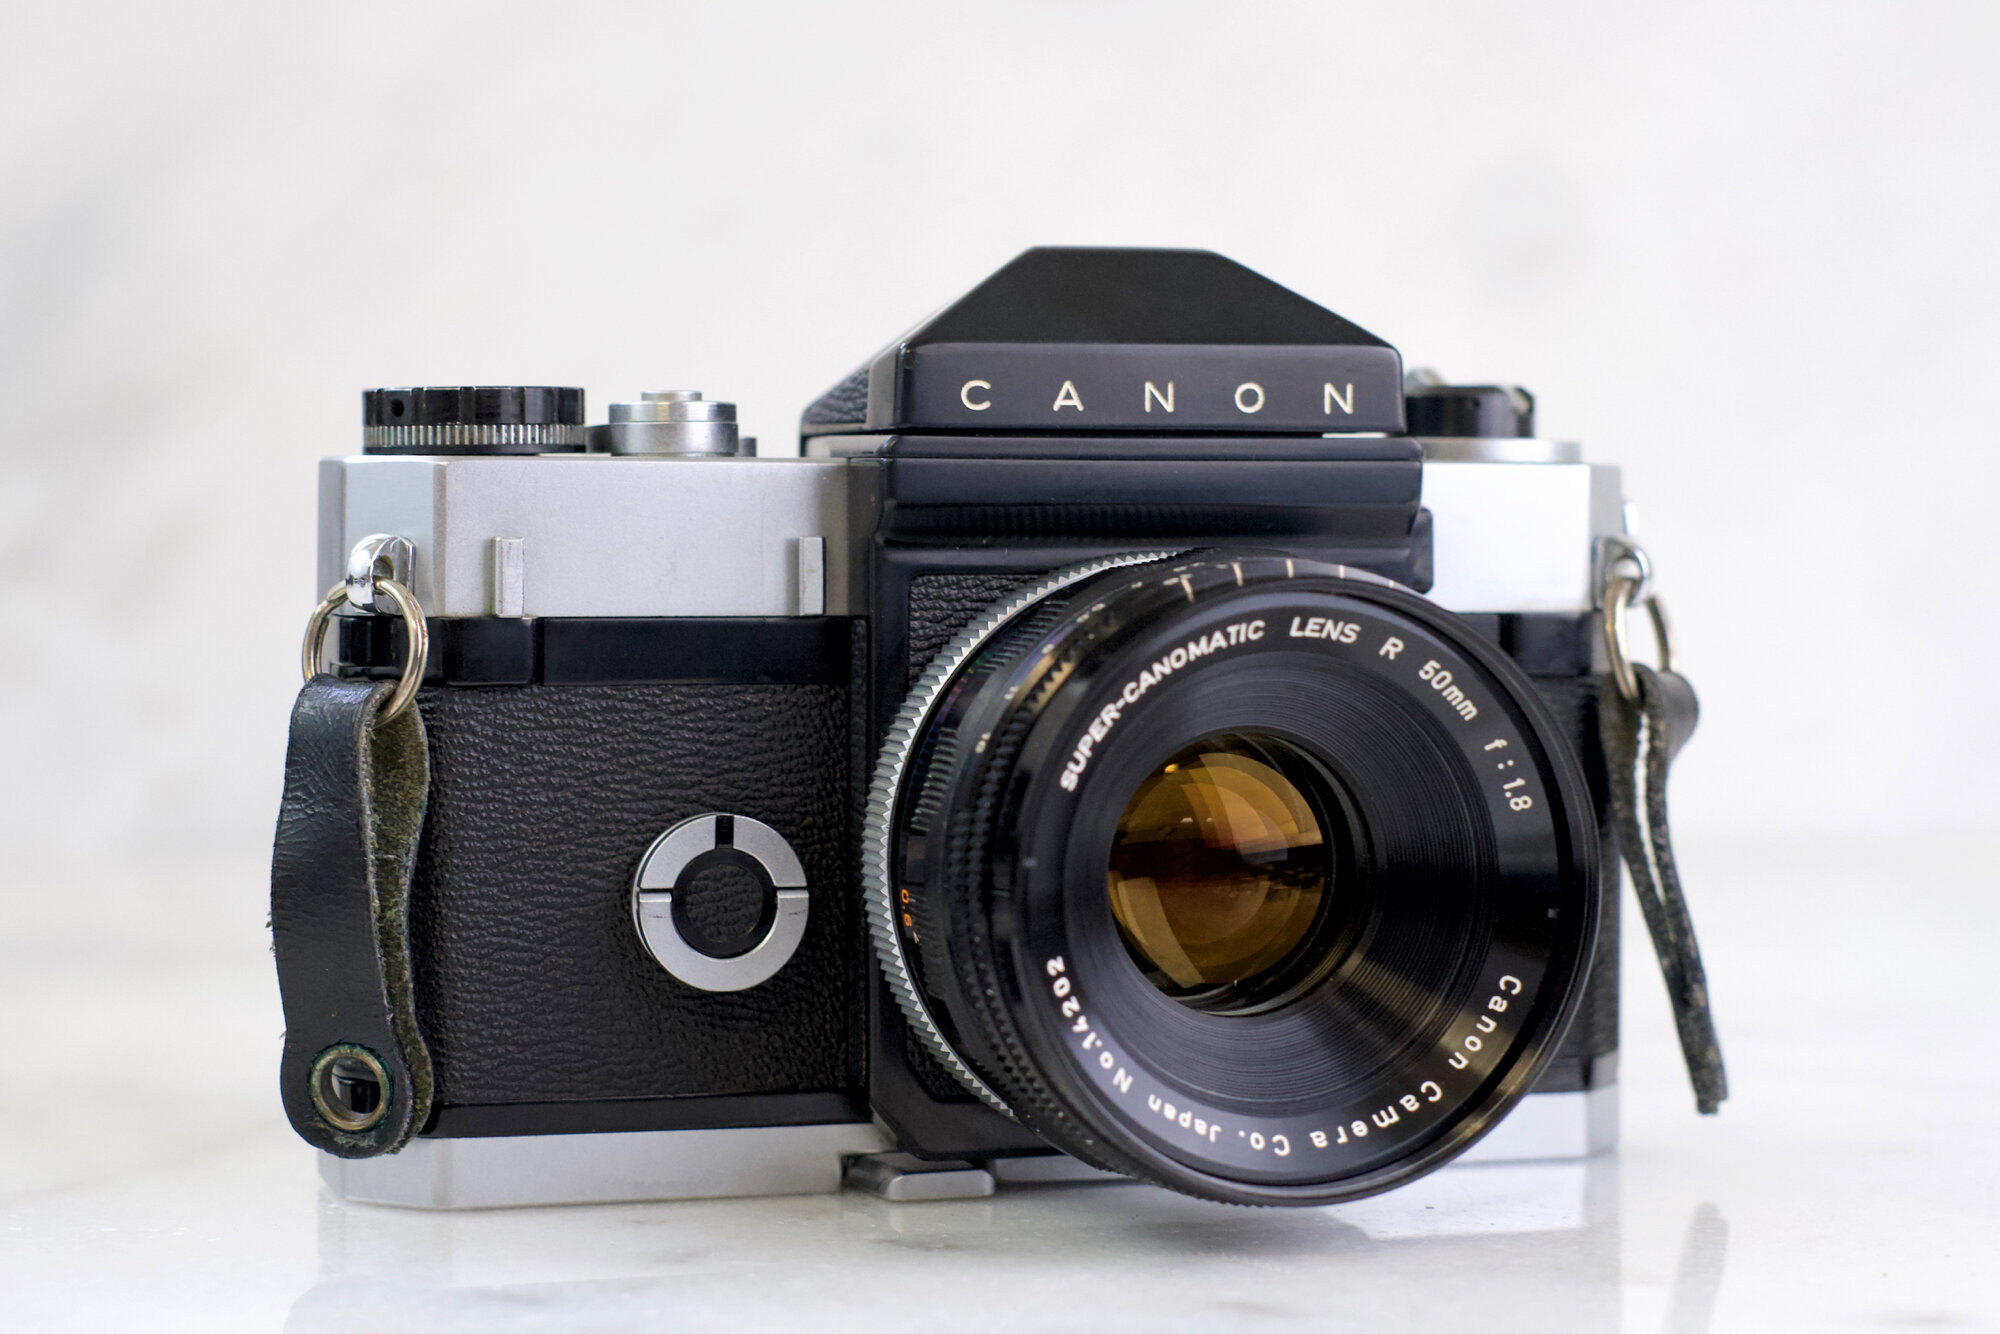 Canon Canonflex 35mm Film SLR Camera with Super Canomatic Lens R 50mm F/1.8  — F Stop Cameras